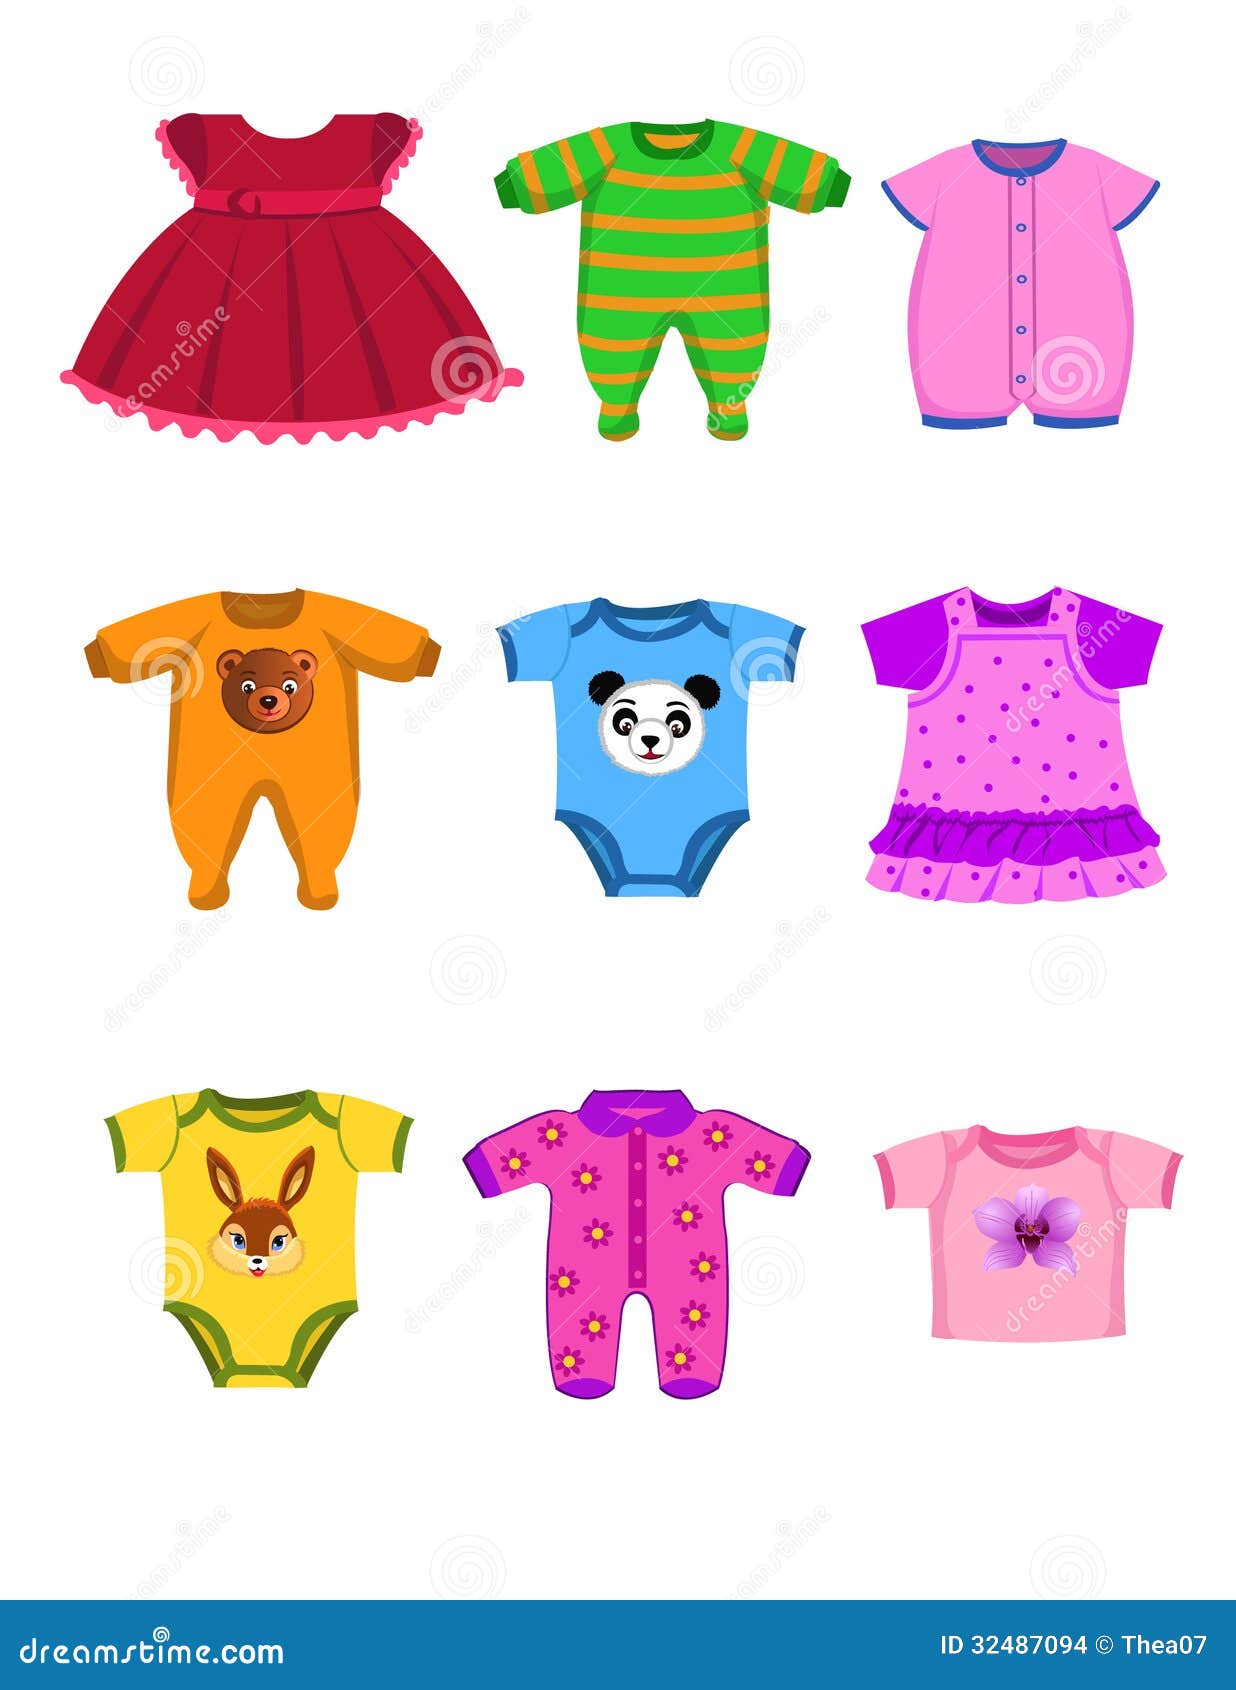 baby clothing clipart - photo #50